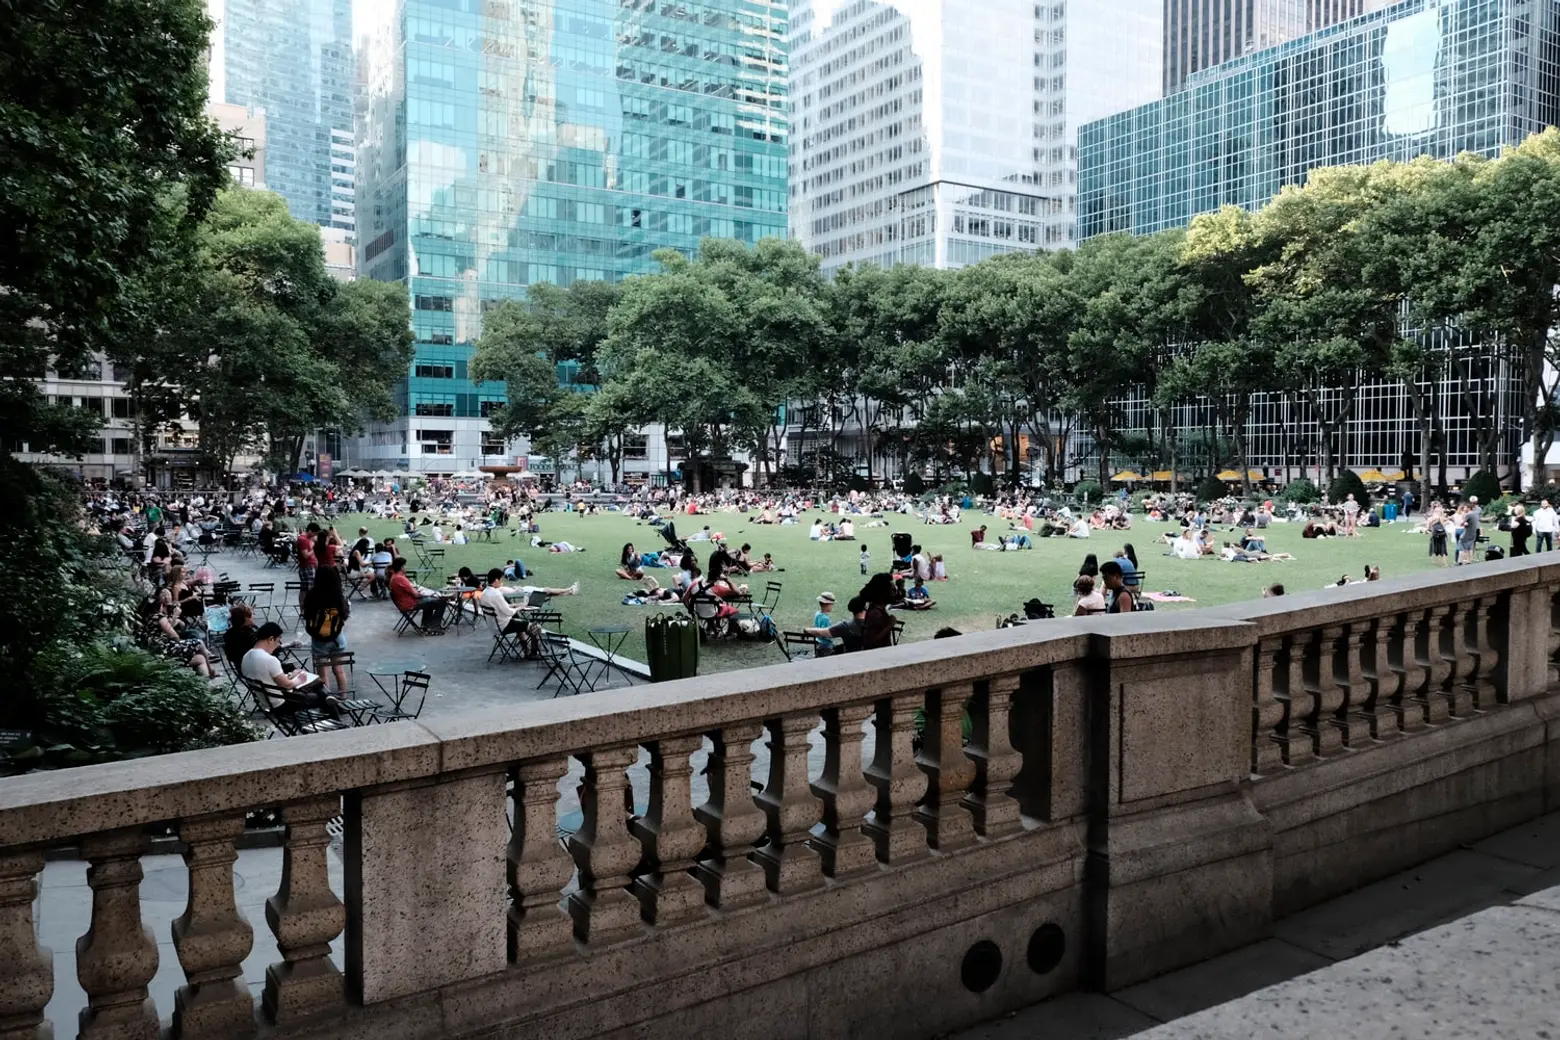 Dining, shopping, and 25 live performances are coming to Bryant Park